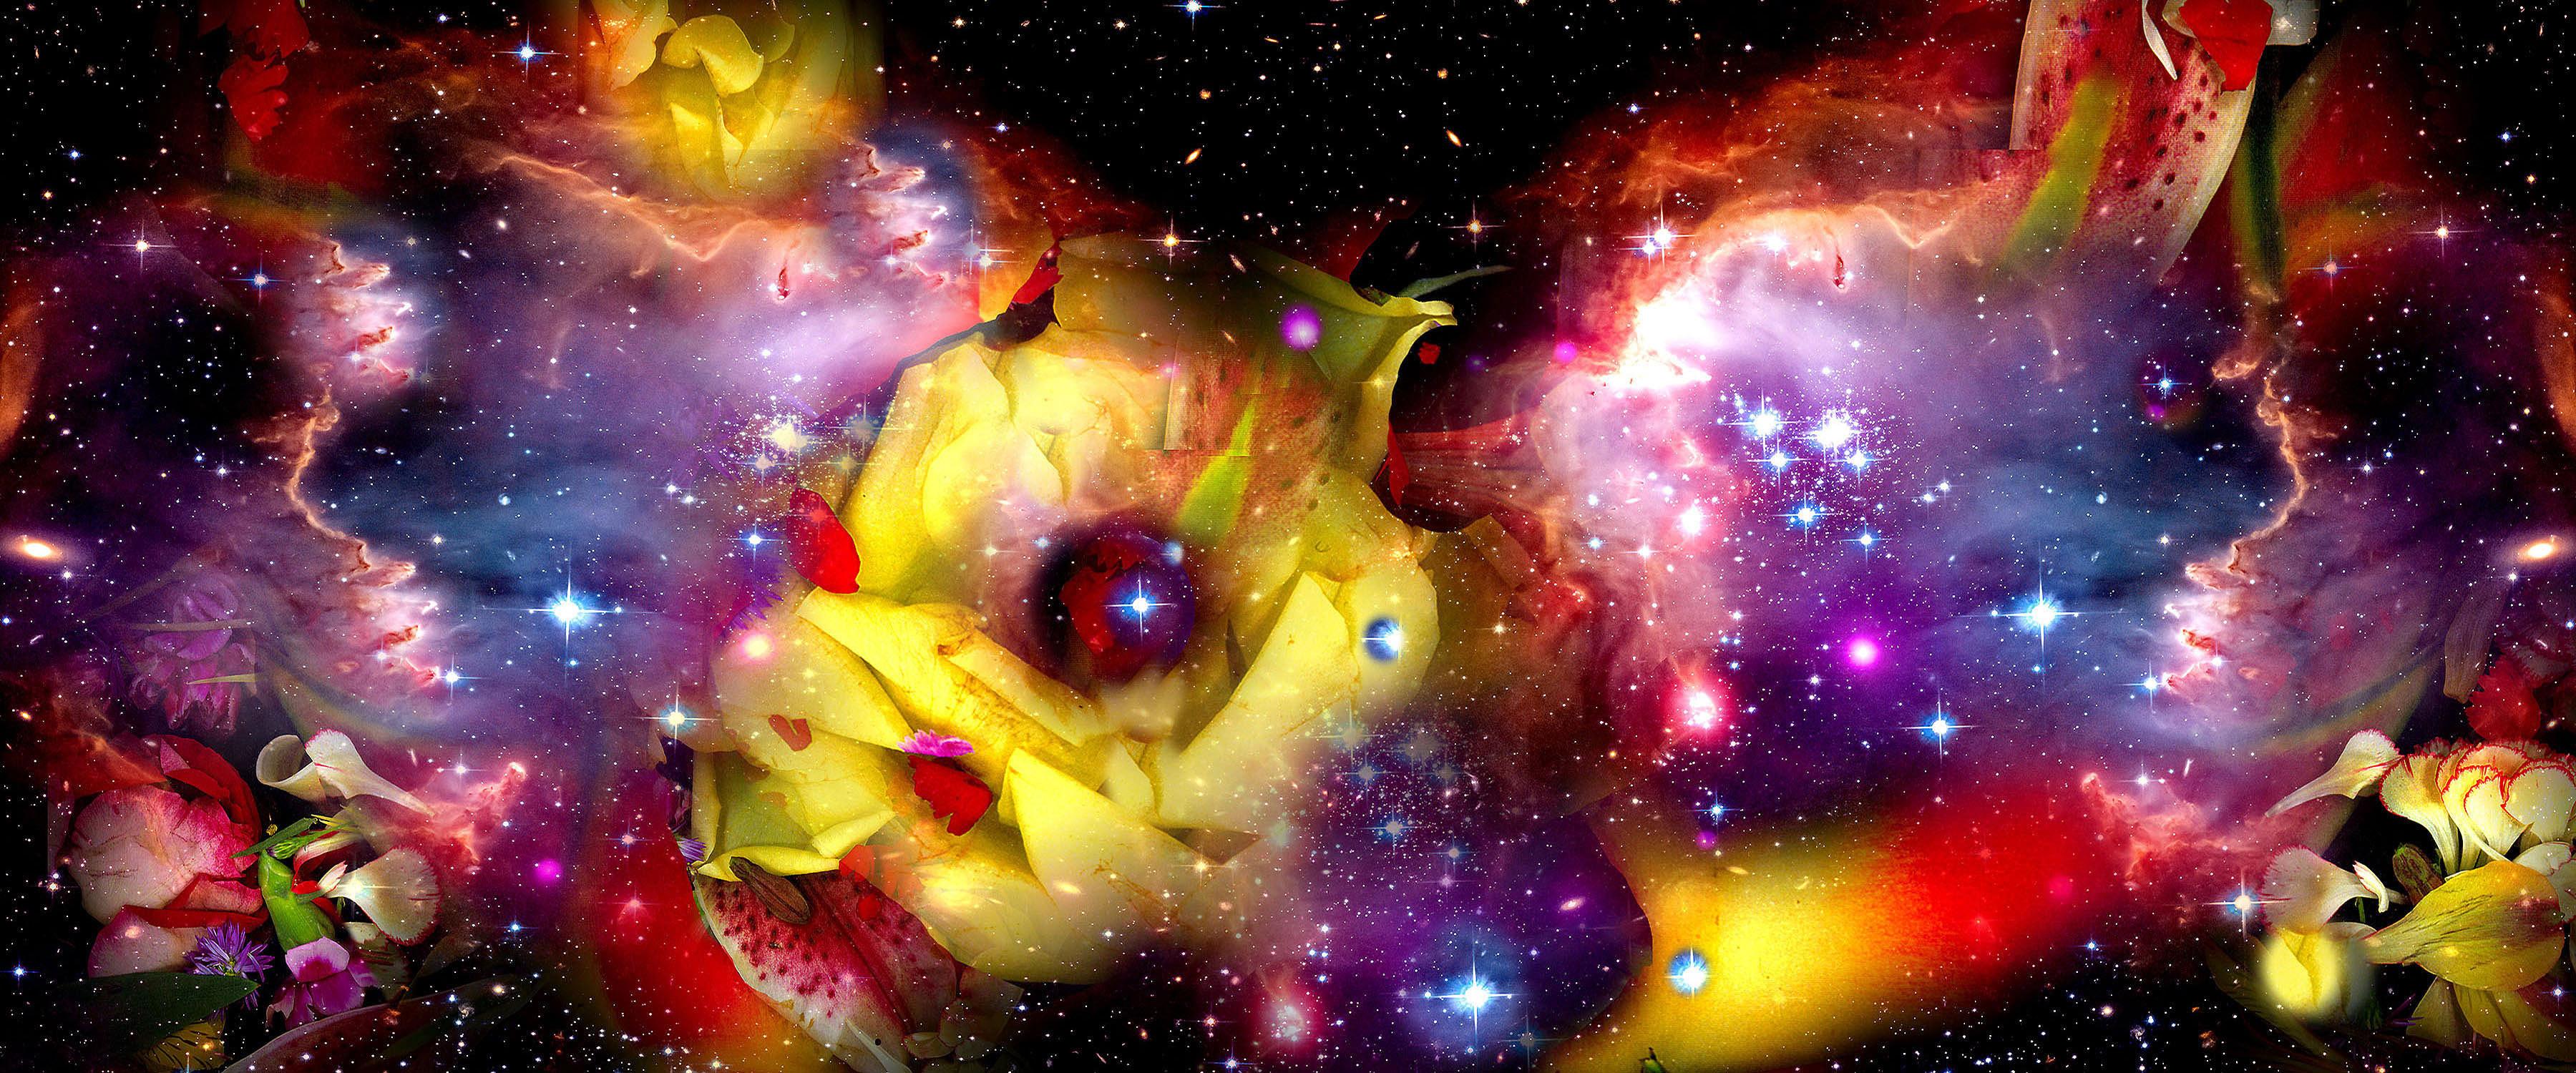 Gardens & Galaxies: Yellow Rose 24"42" bright color abstract sky nature panorama